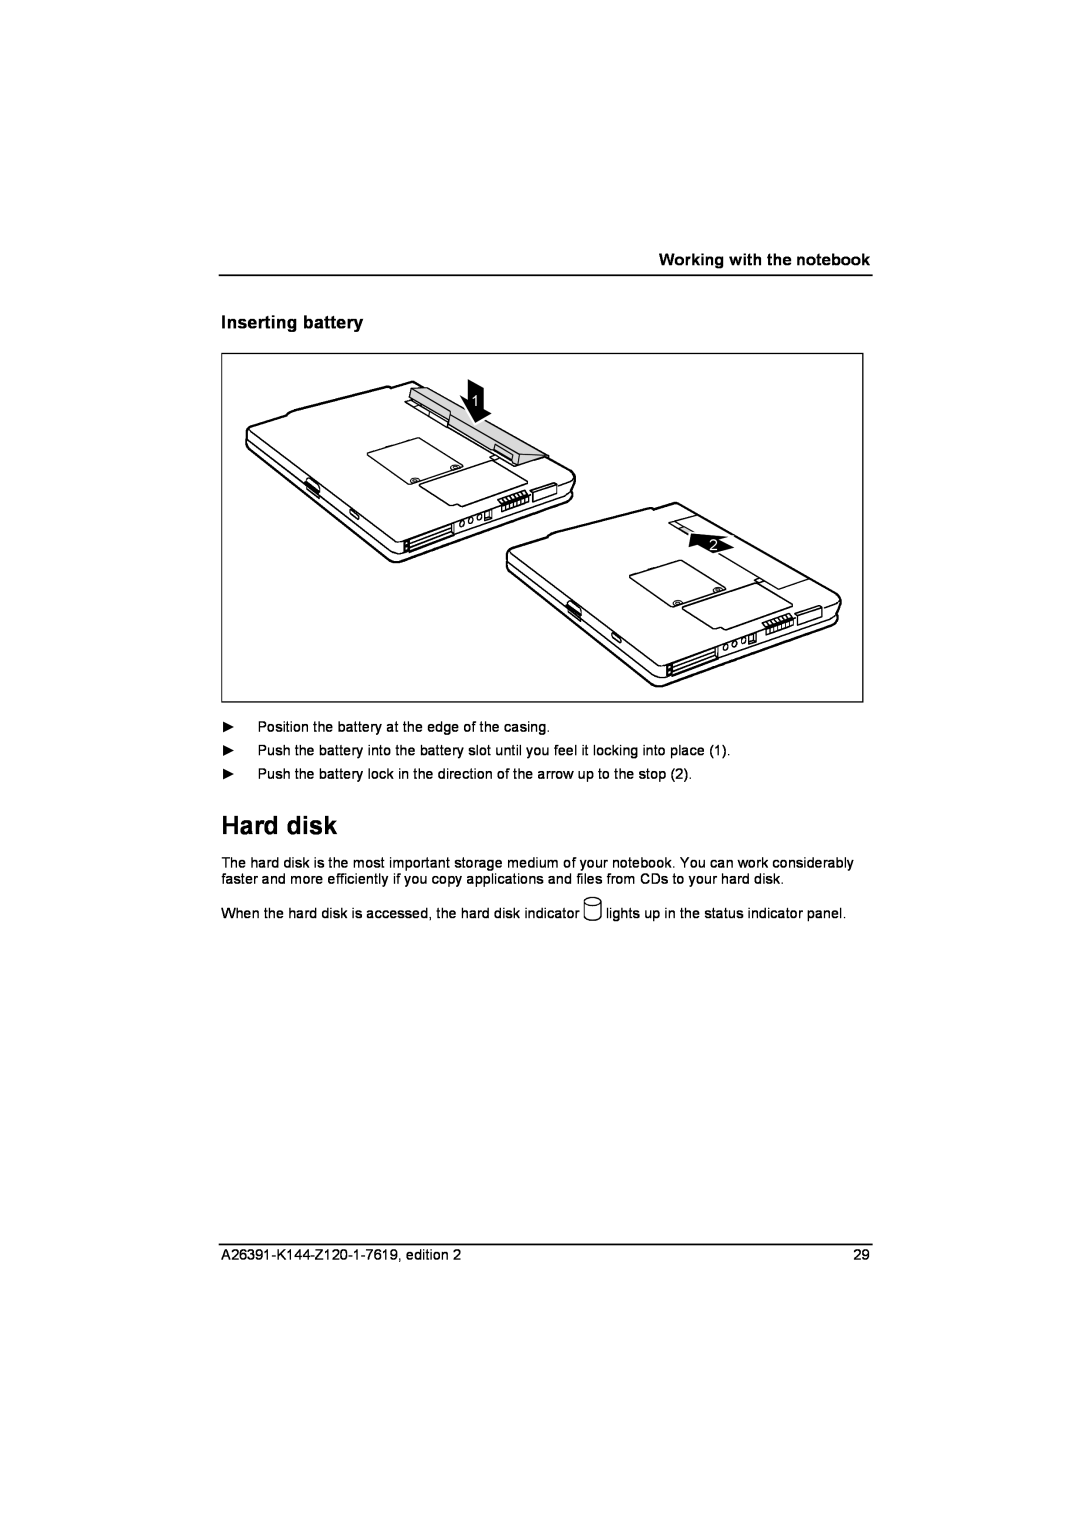 Fujitsu S SERIES manual Hard disk, Inserting battery, Working with the notebook 